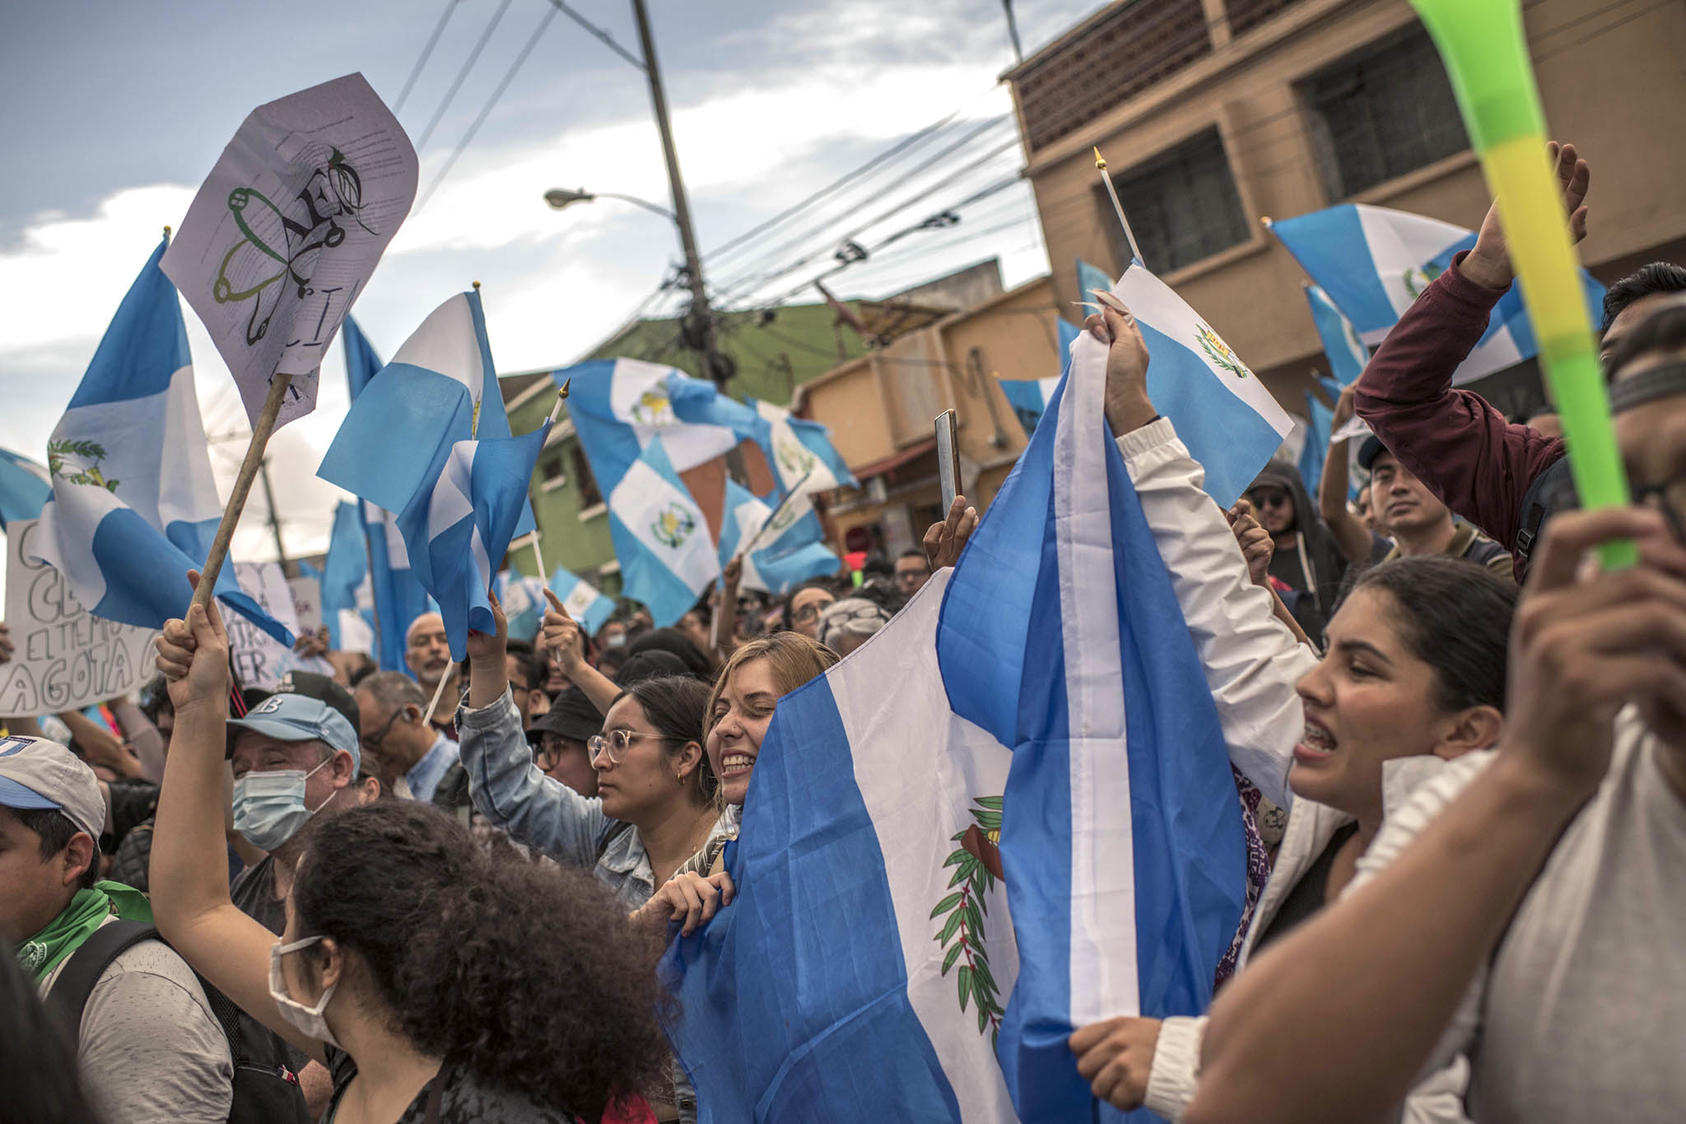 A protest in Guatemala City against a prosecutor’s attempt to bar then-candidate Bernardo Arévalo from the runoff election. July 13, 2023. (Daniele Volpe/The New York Times)